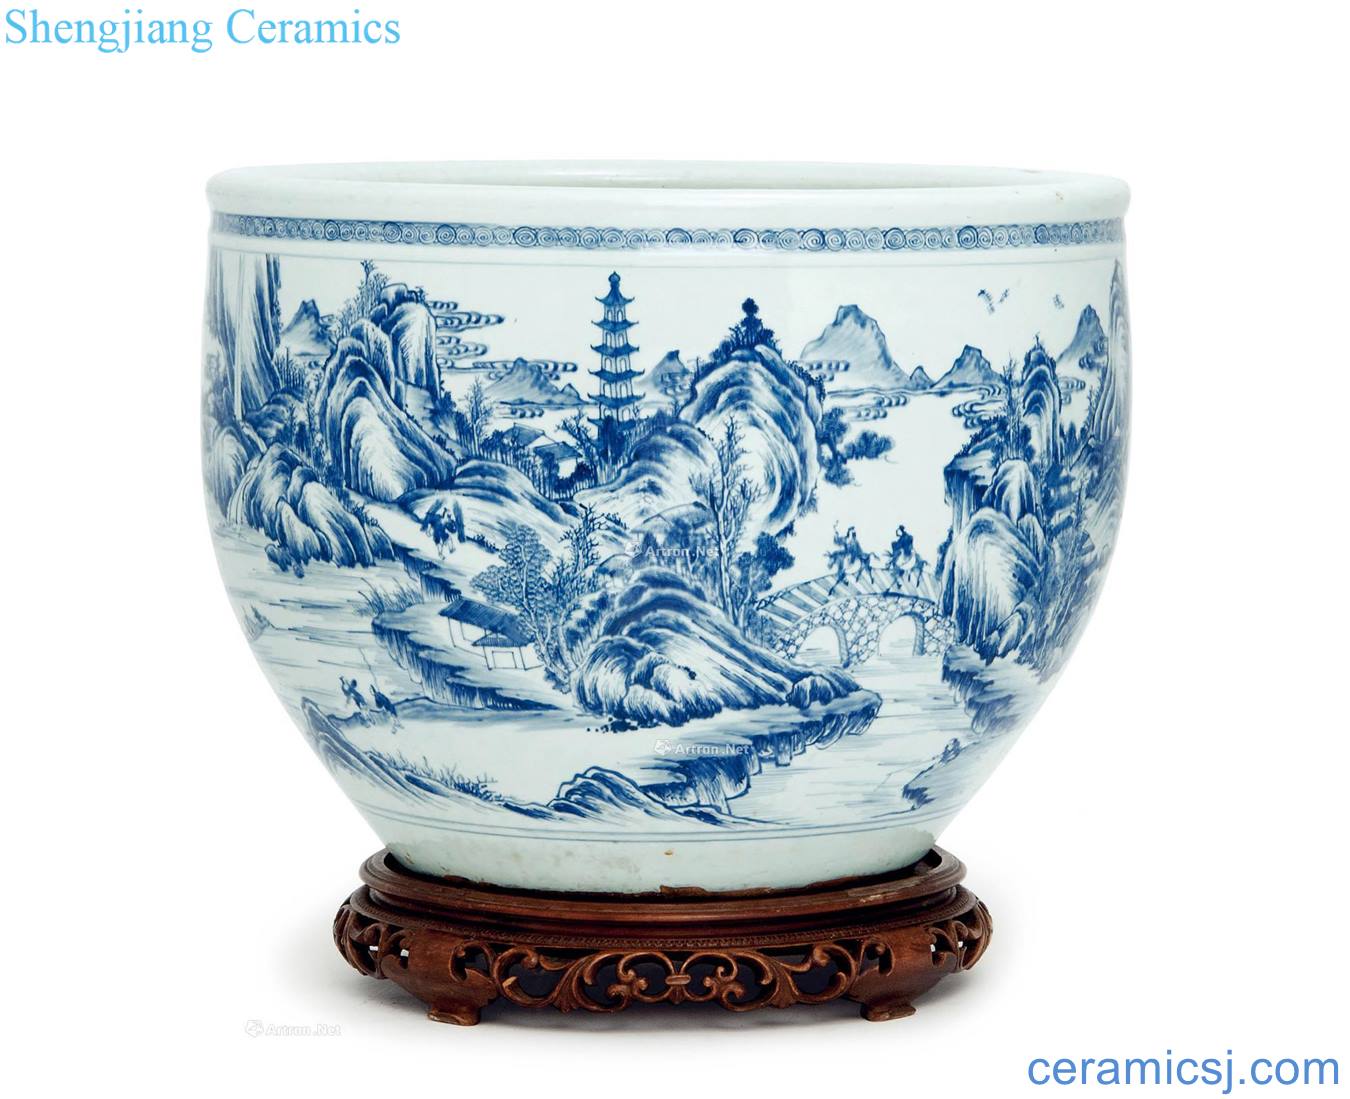 In the 18th century qing Blue and white landscape character figure big flower pot